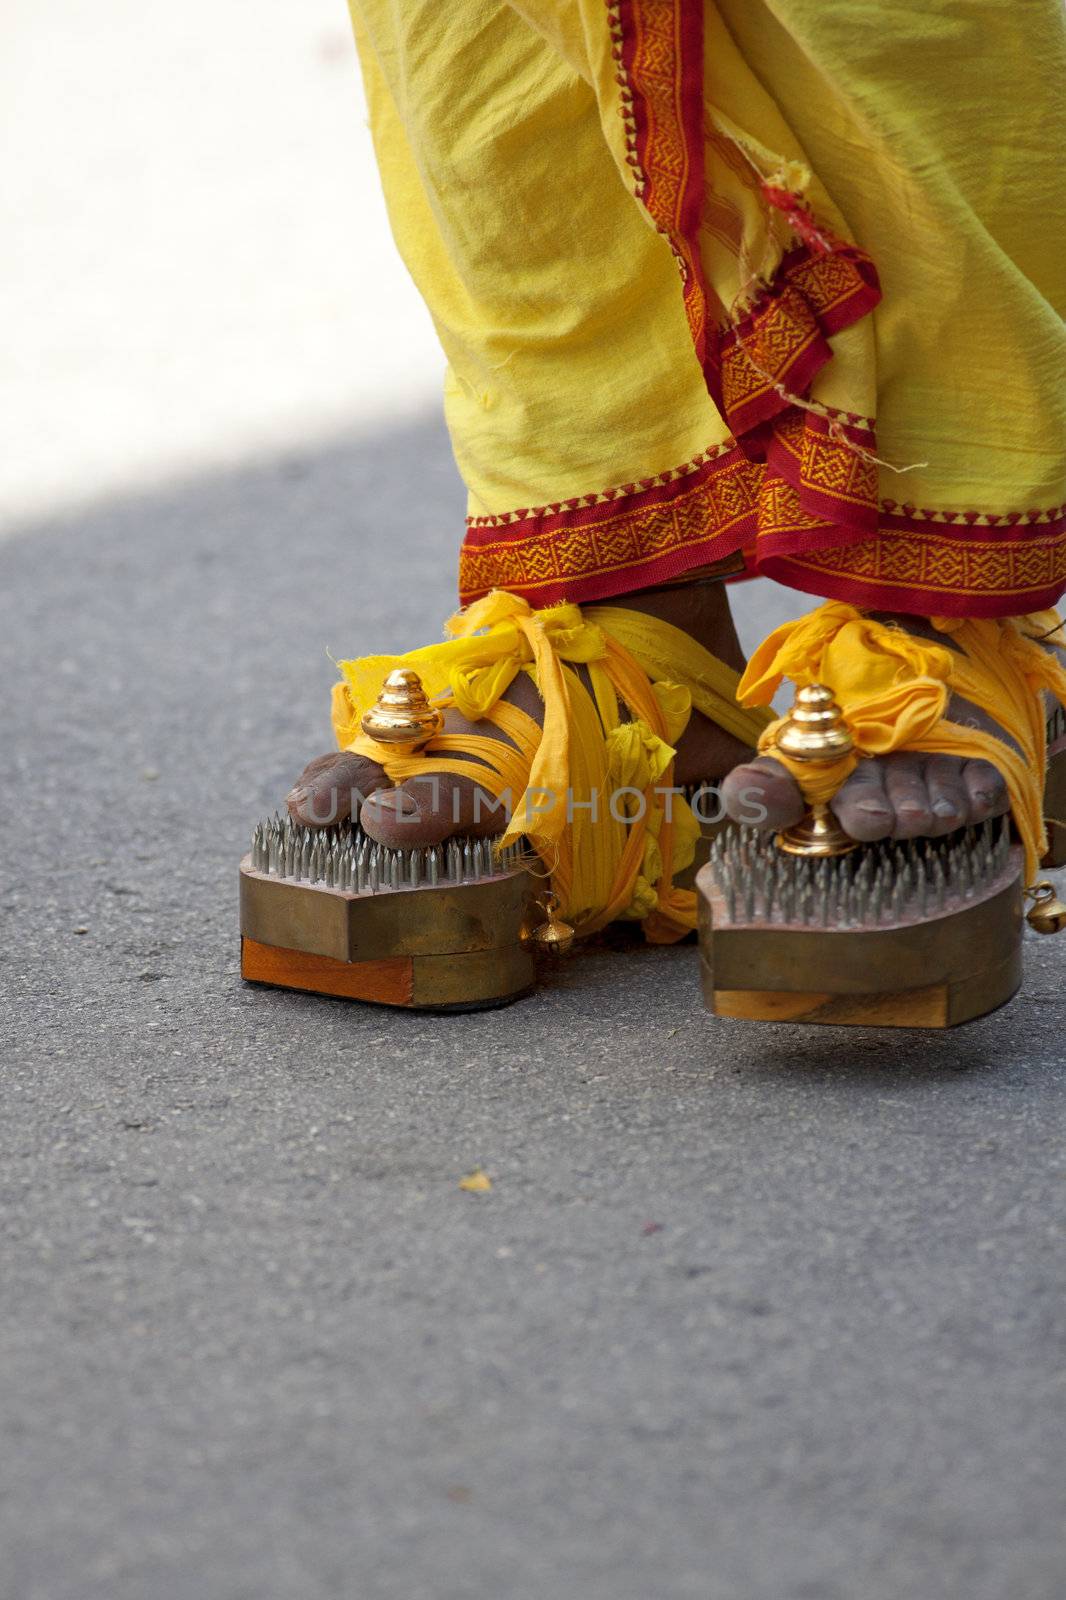 Devotee walking in the Thaipusam festival in Singapore